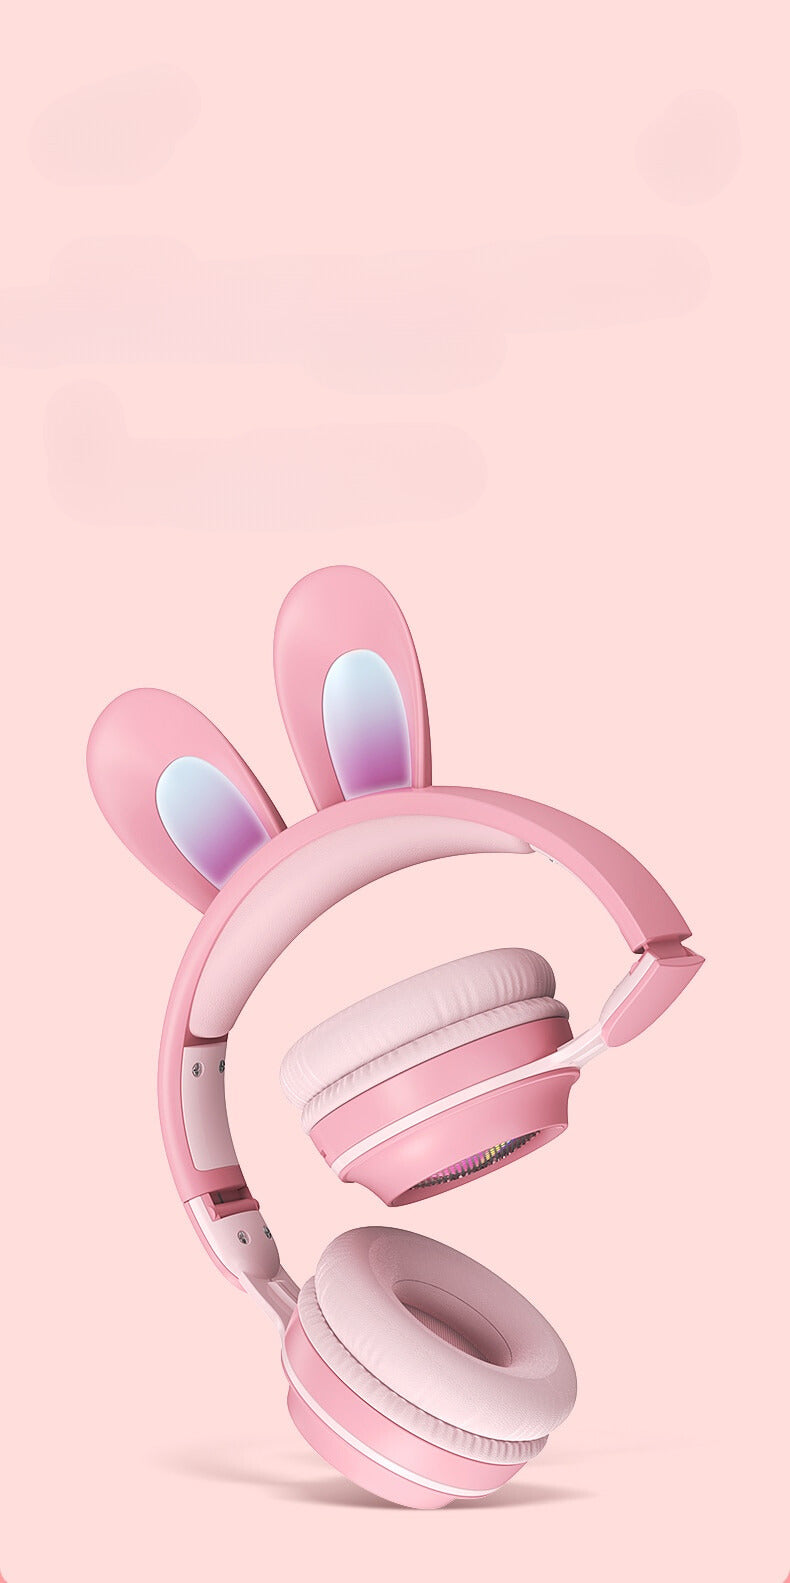 Bunny Ears Wireless Gaming Headset, Removable Micropfone & Noise Cancellation